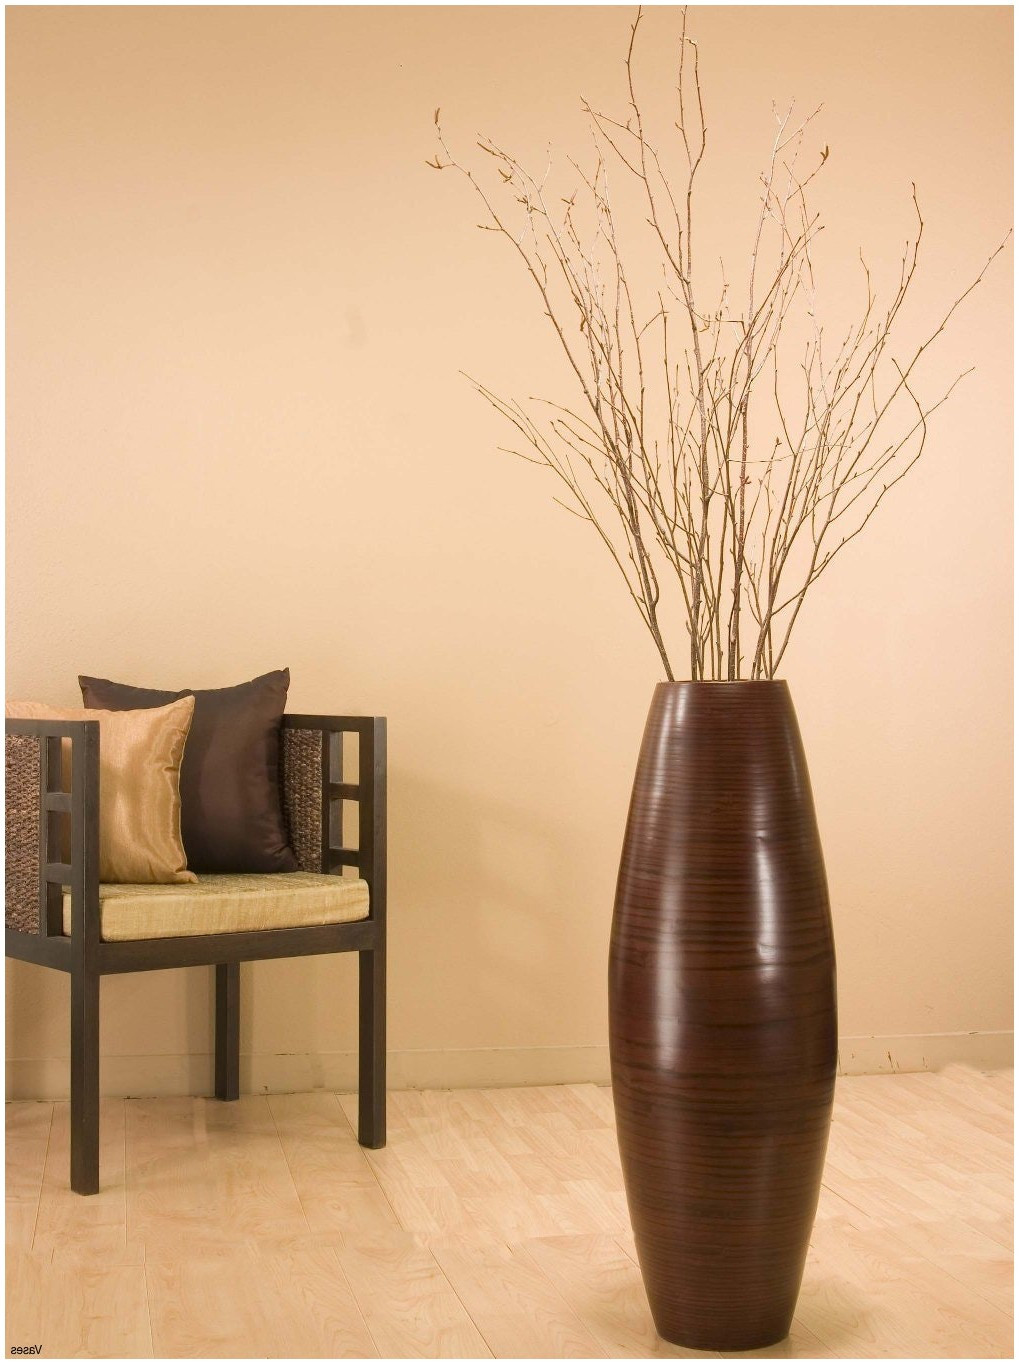 27 Wonderful Tall Vase with Sticks 2023 free download tall vase with sticks of 21 beau decorative vases anciendemutu org in 712x0qv9hql sl1364 h vases tall green floor decorative standing with branchesi 0d